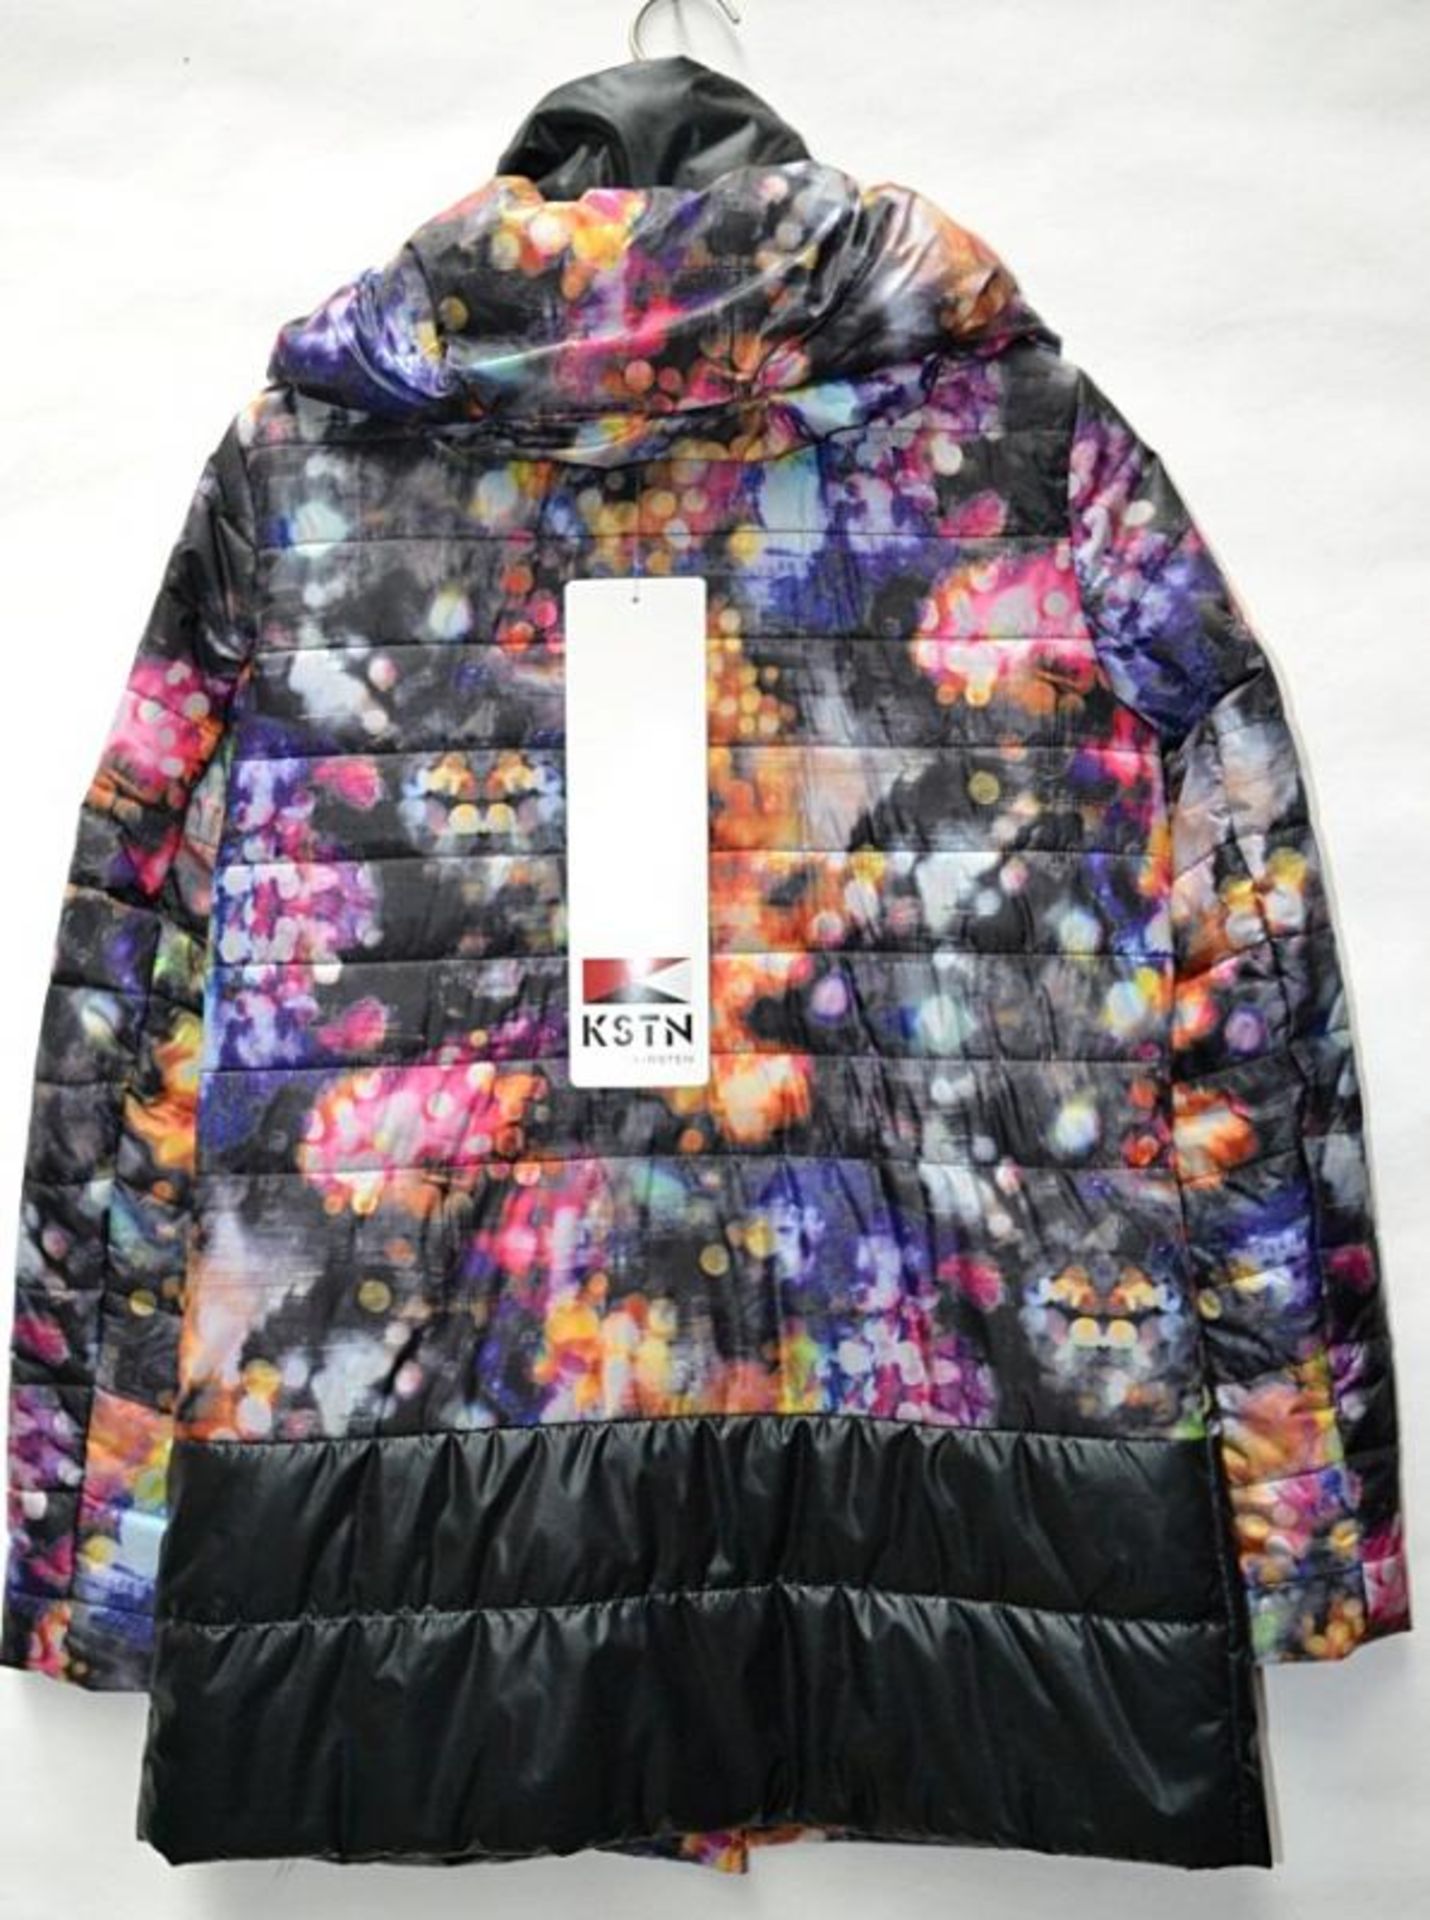 1 x Steilmann Kirsten Womens Padded Winter Coat - Features A Bright Multi-Coloured Design And Padded - Image 2 of 2